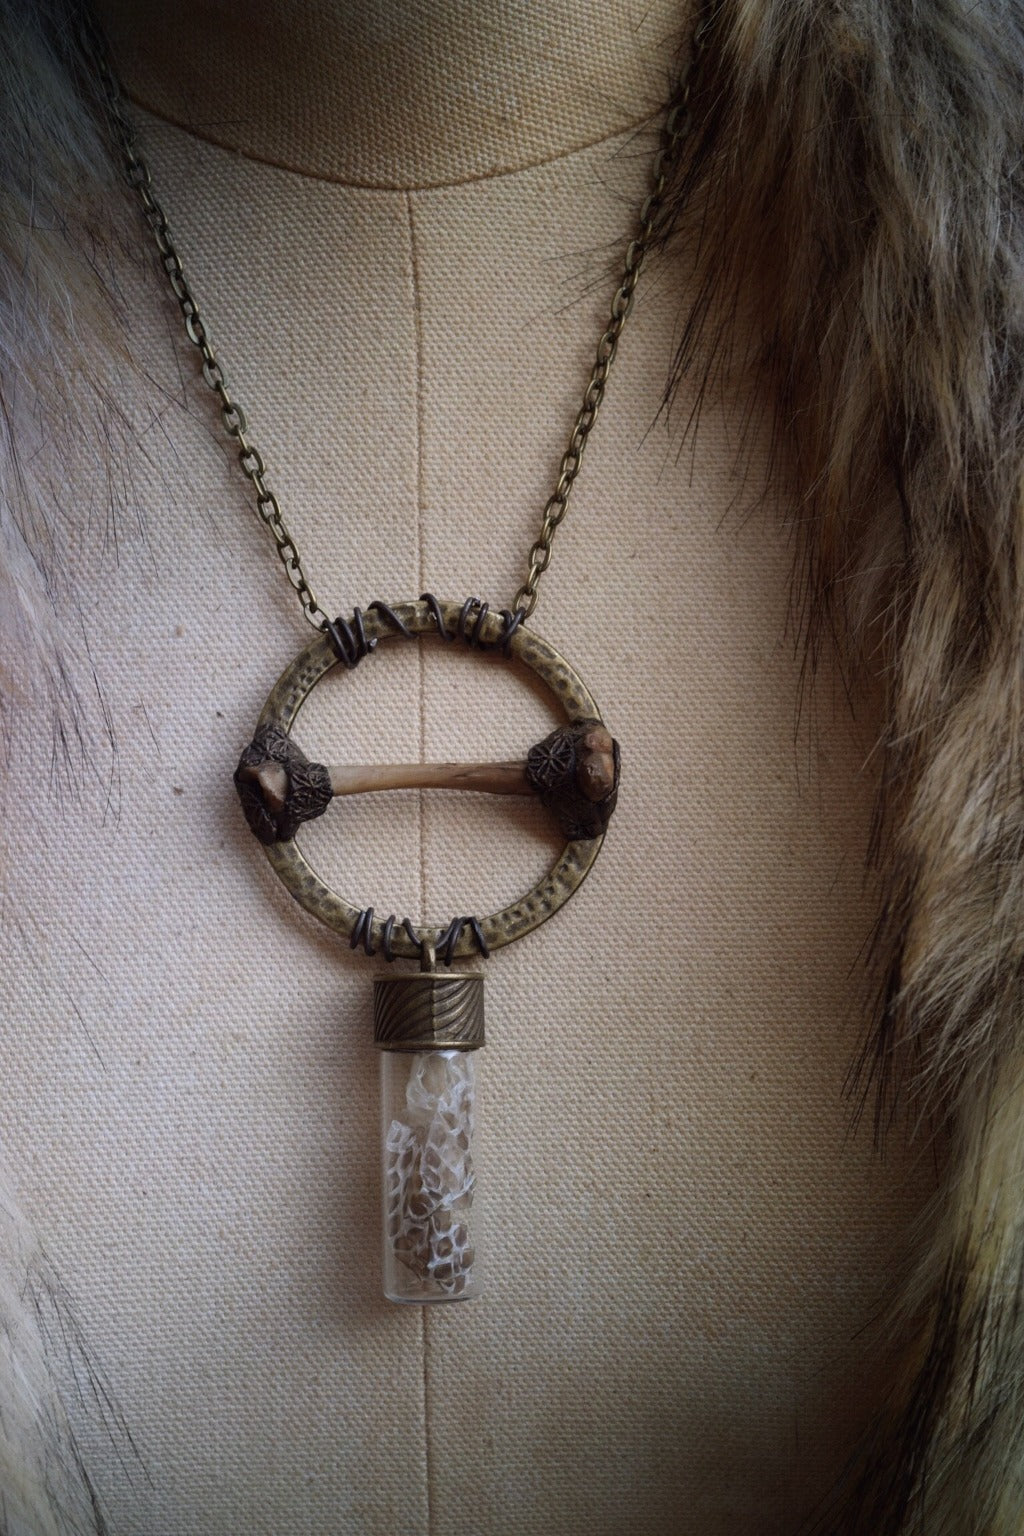 Inanna Necklace for Love, Courage  and Rebirth